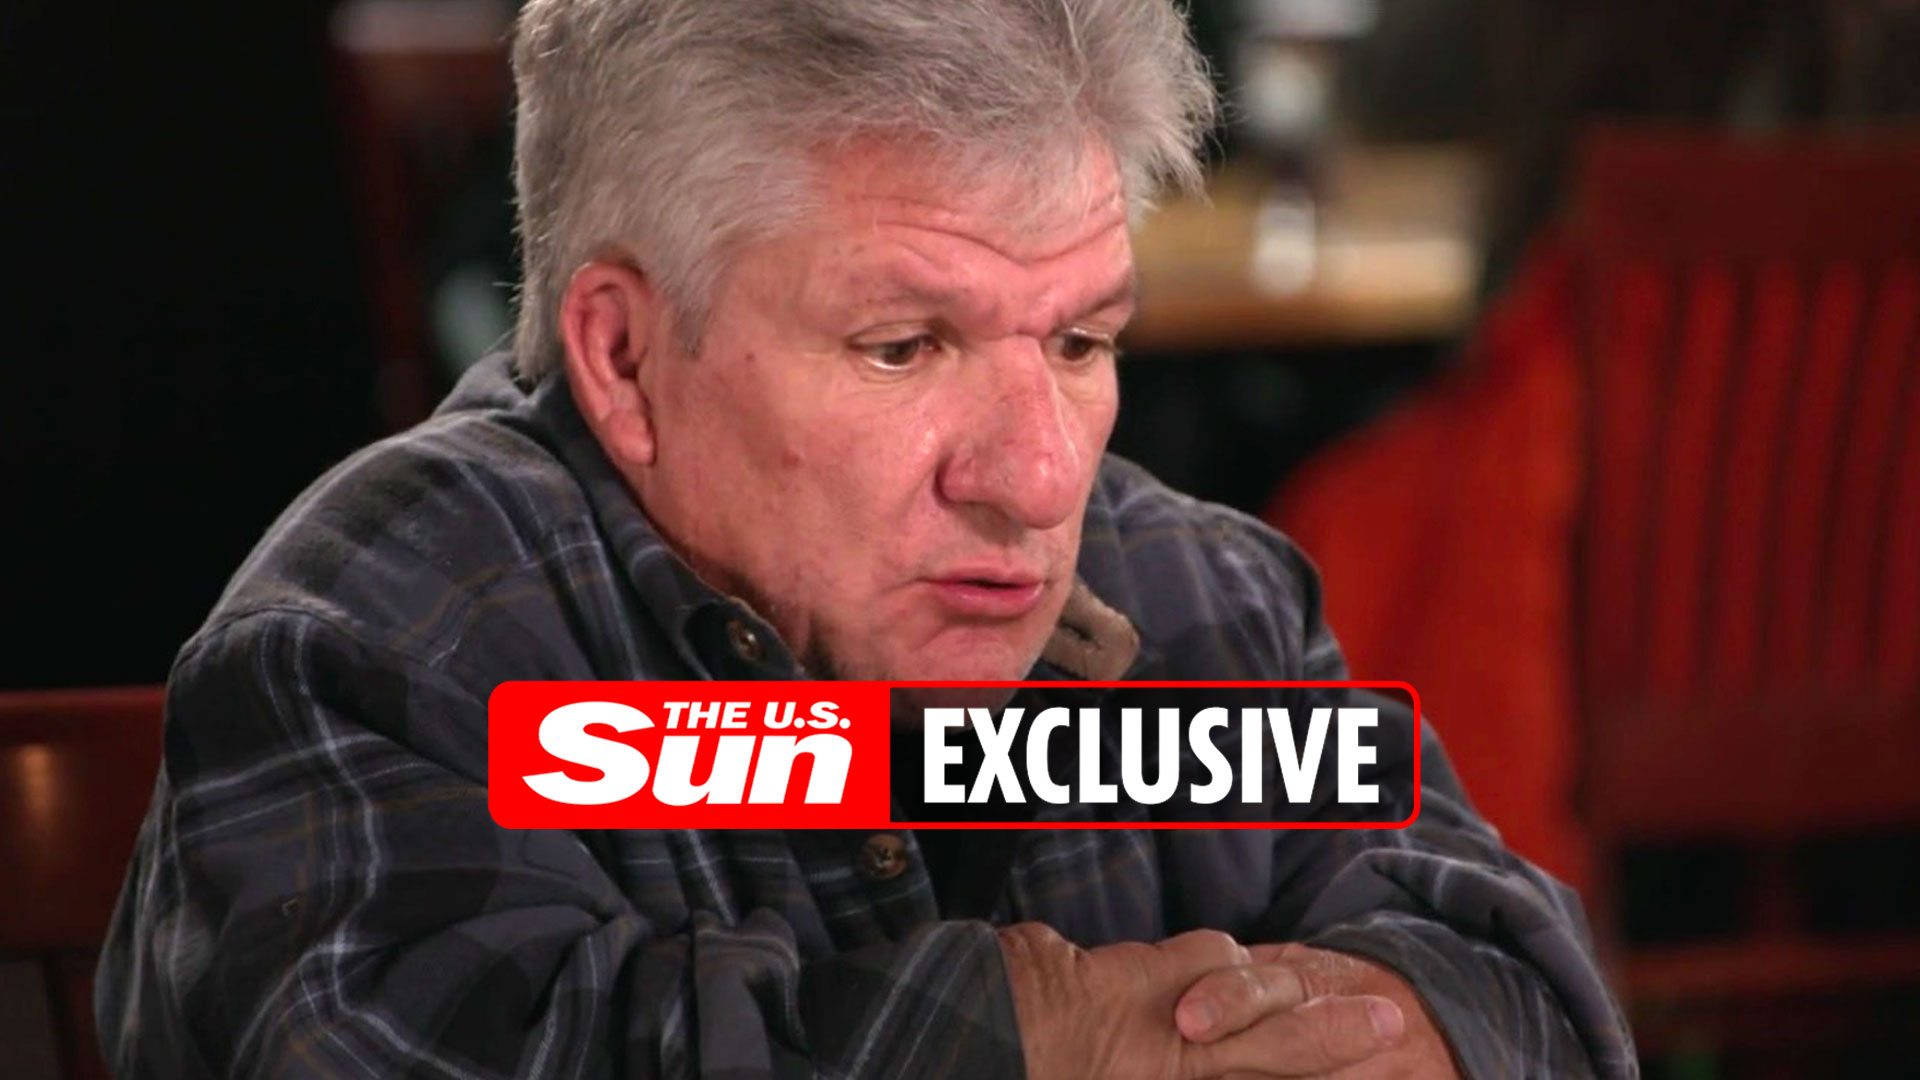 Little People’s Matt Roloff selling 16 acres of farm land for TRIPLE the price he paid ex-wife Amy for amid nasty feud